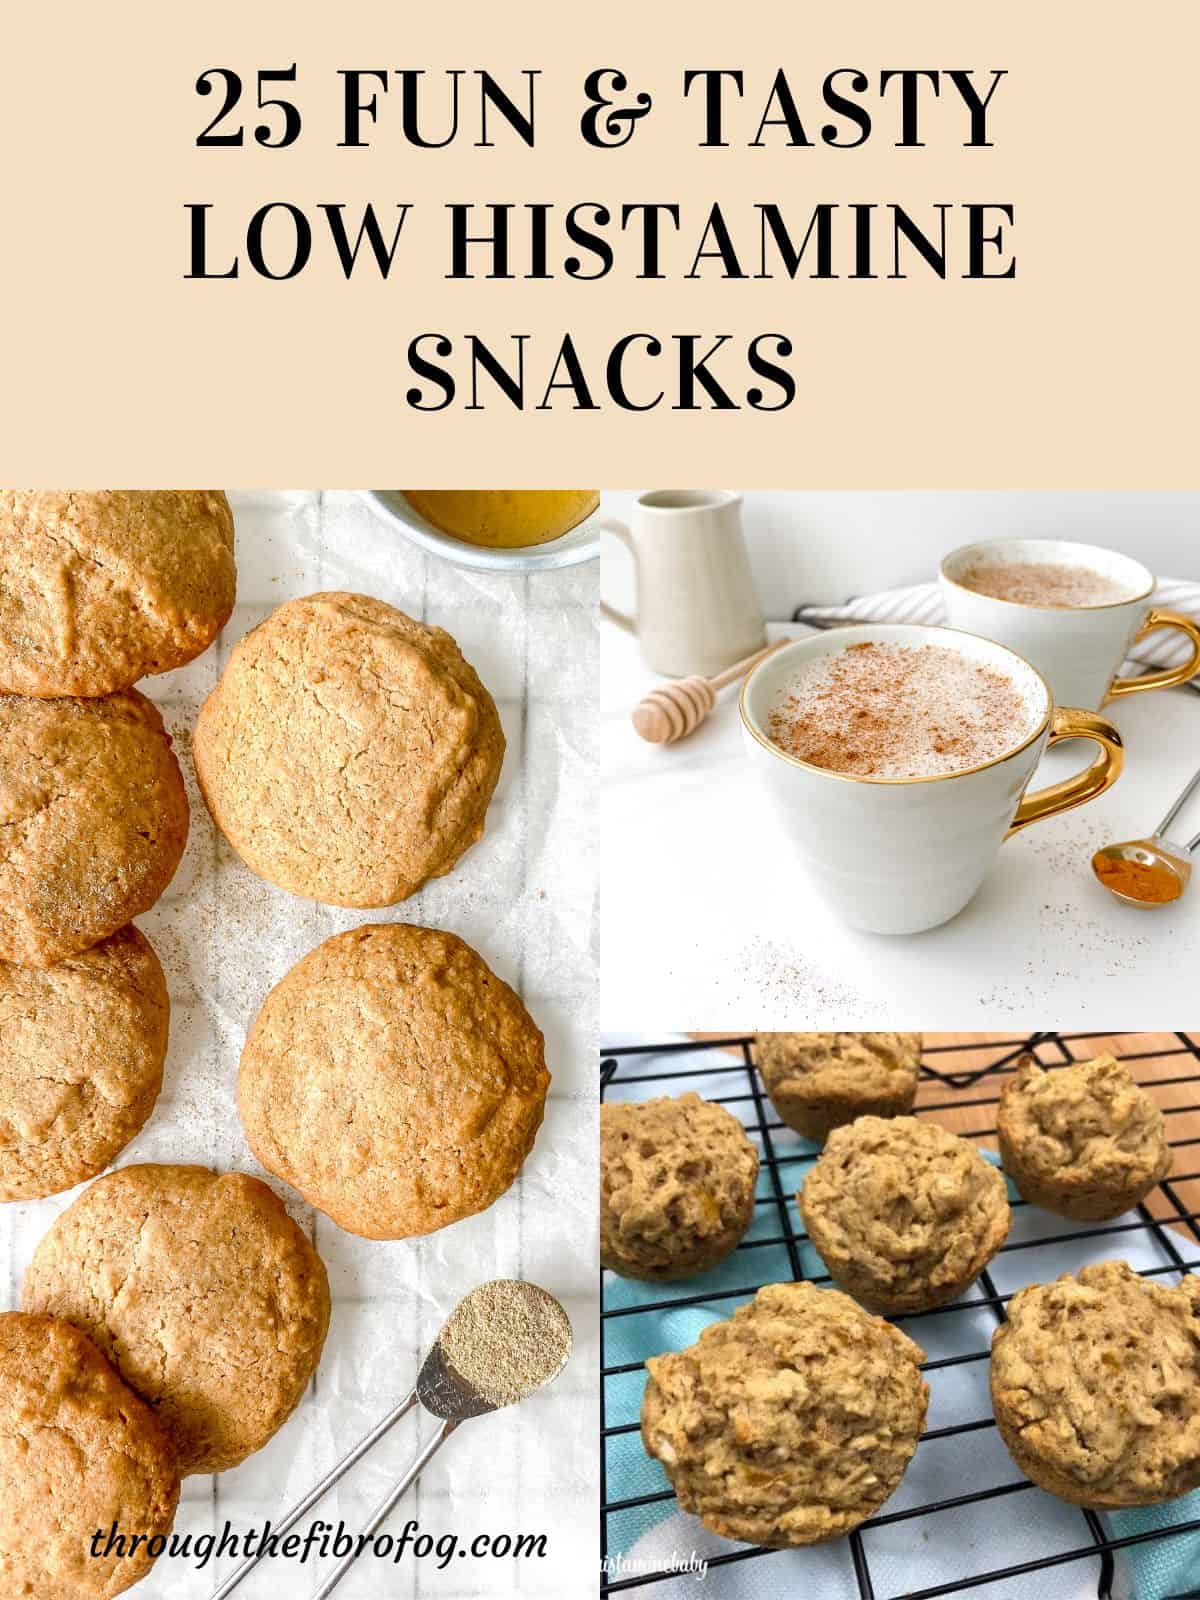 labelled 25 fun and tasty low histamine snacks with images of cookies, muffins and a warm milk drink.